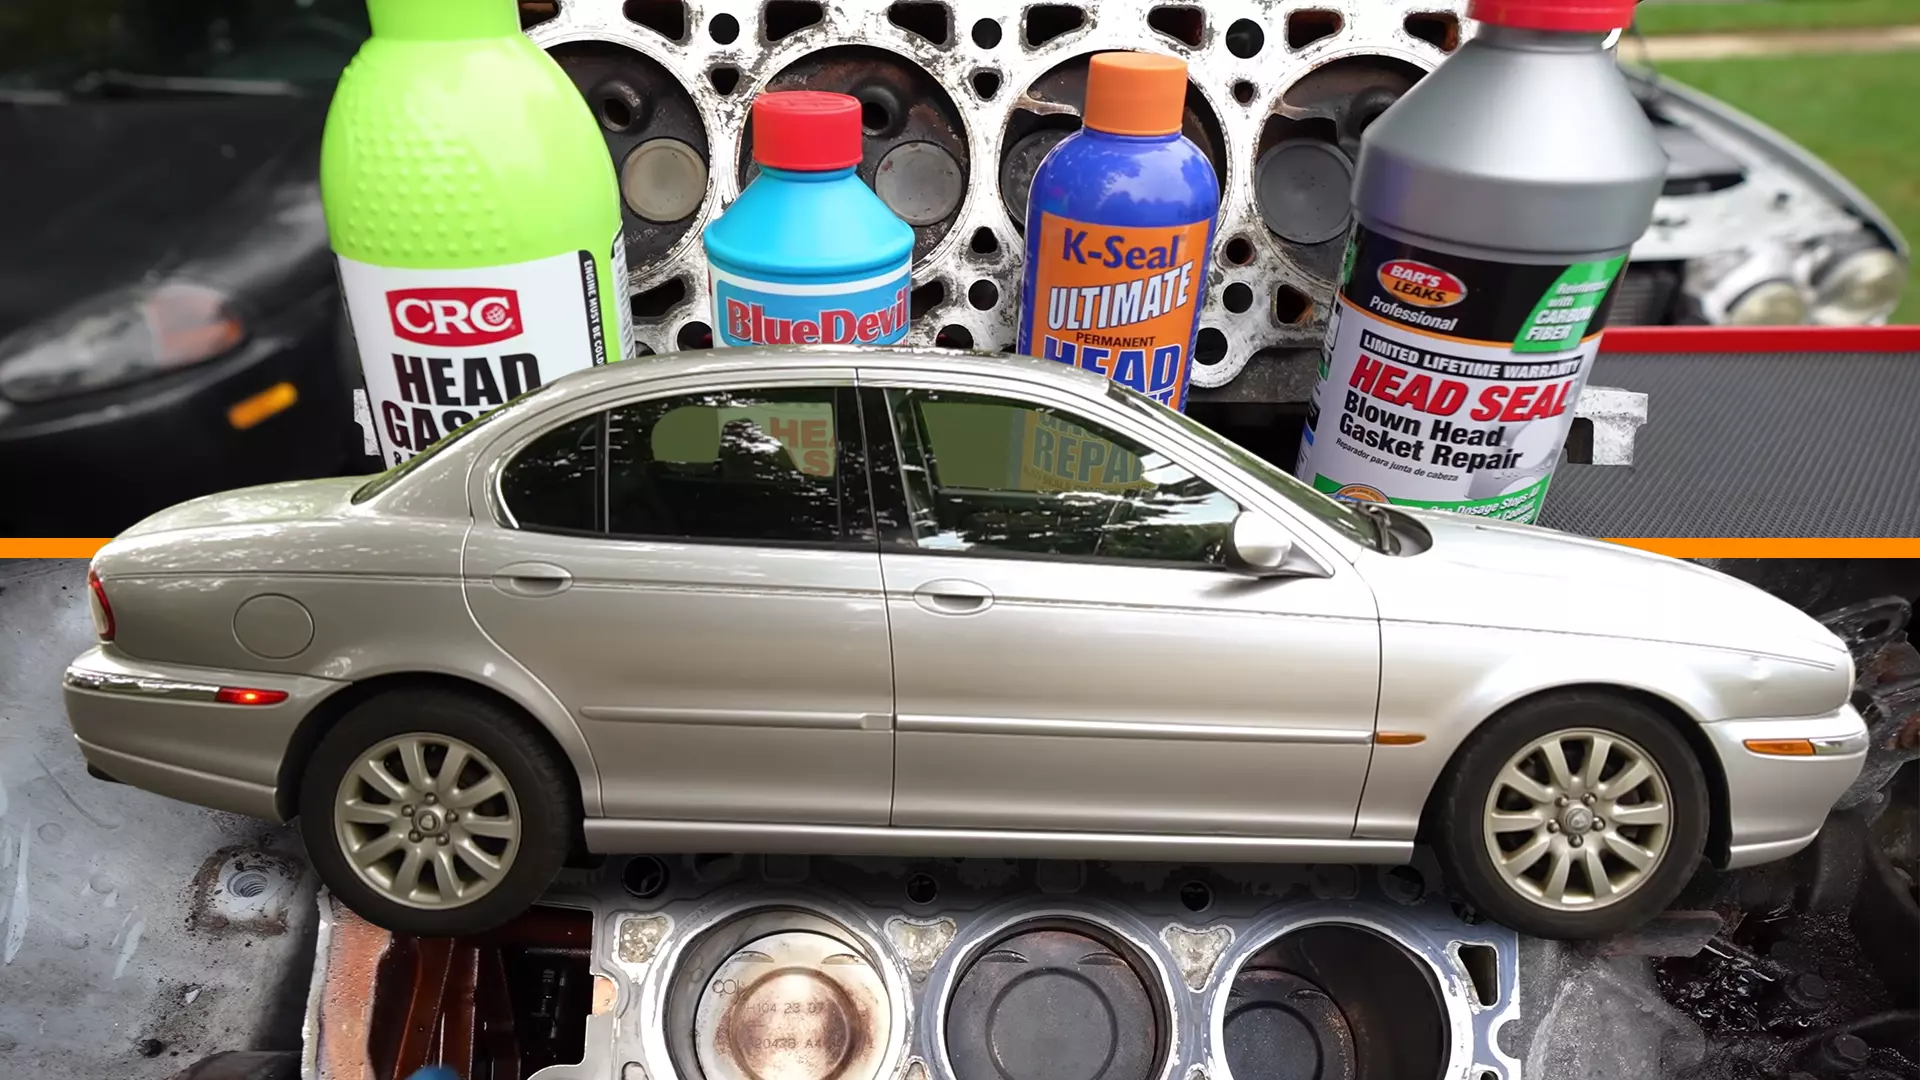 ChrisFix Subjected Head Gasket Sealer To a Real-Life Test, and It Worked | Autance